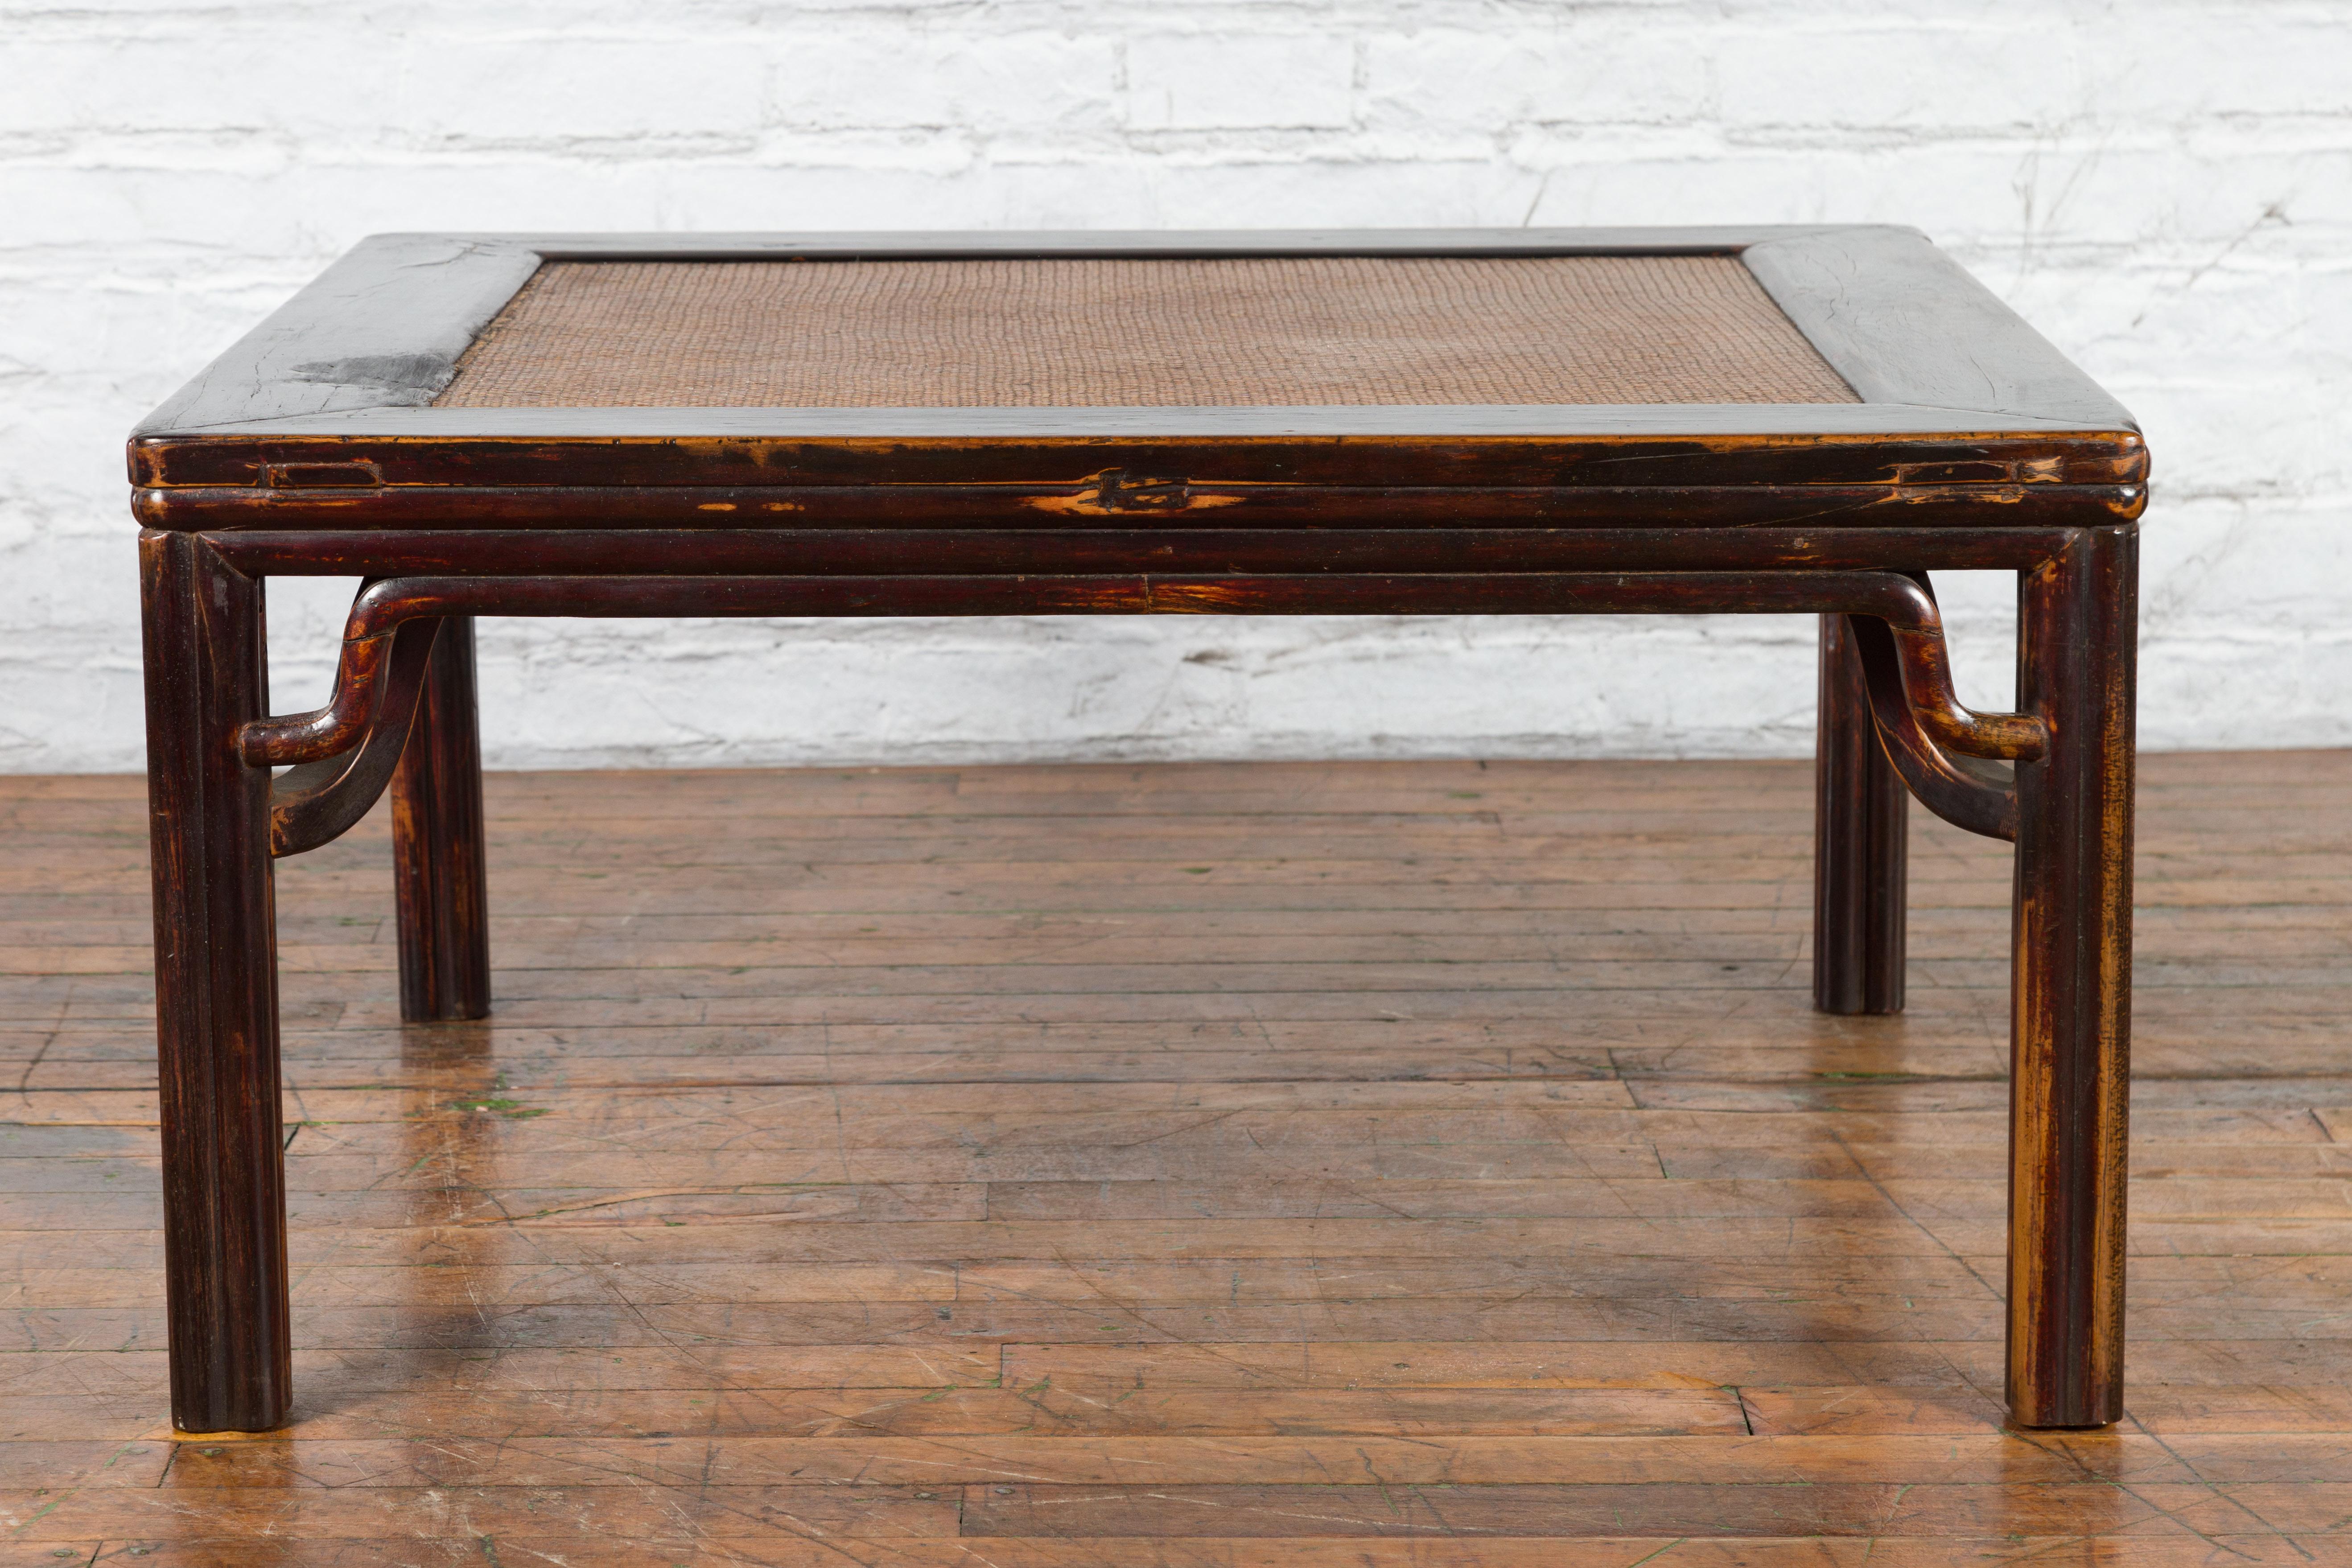 Chinese Ming Dynasty Style Wooden Coffee Table with Hand-Woven Rattan Top For Sale 9